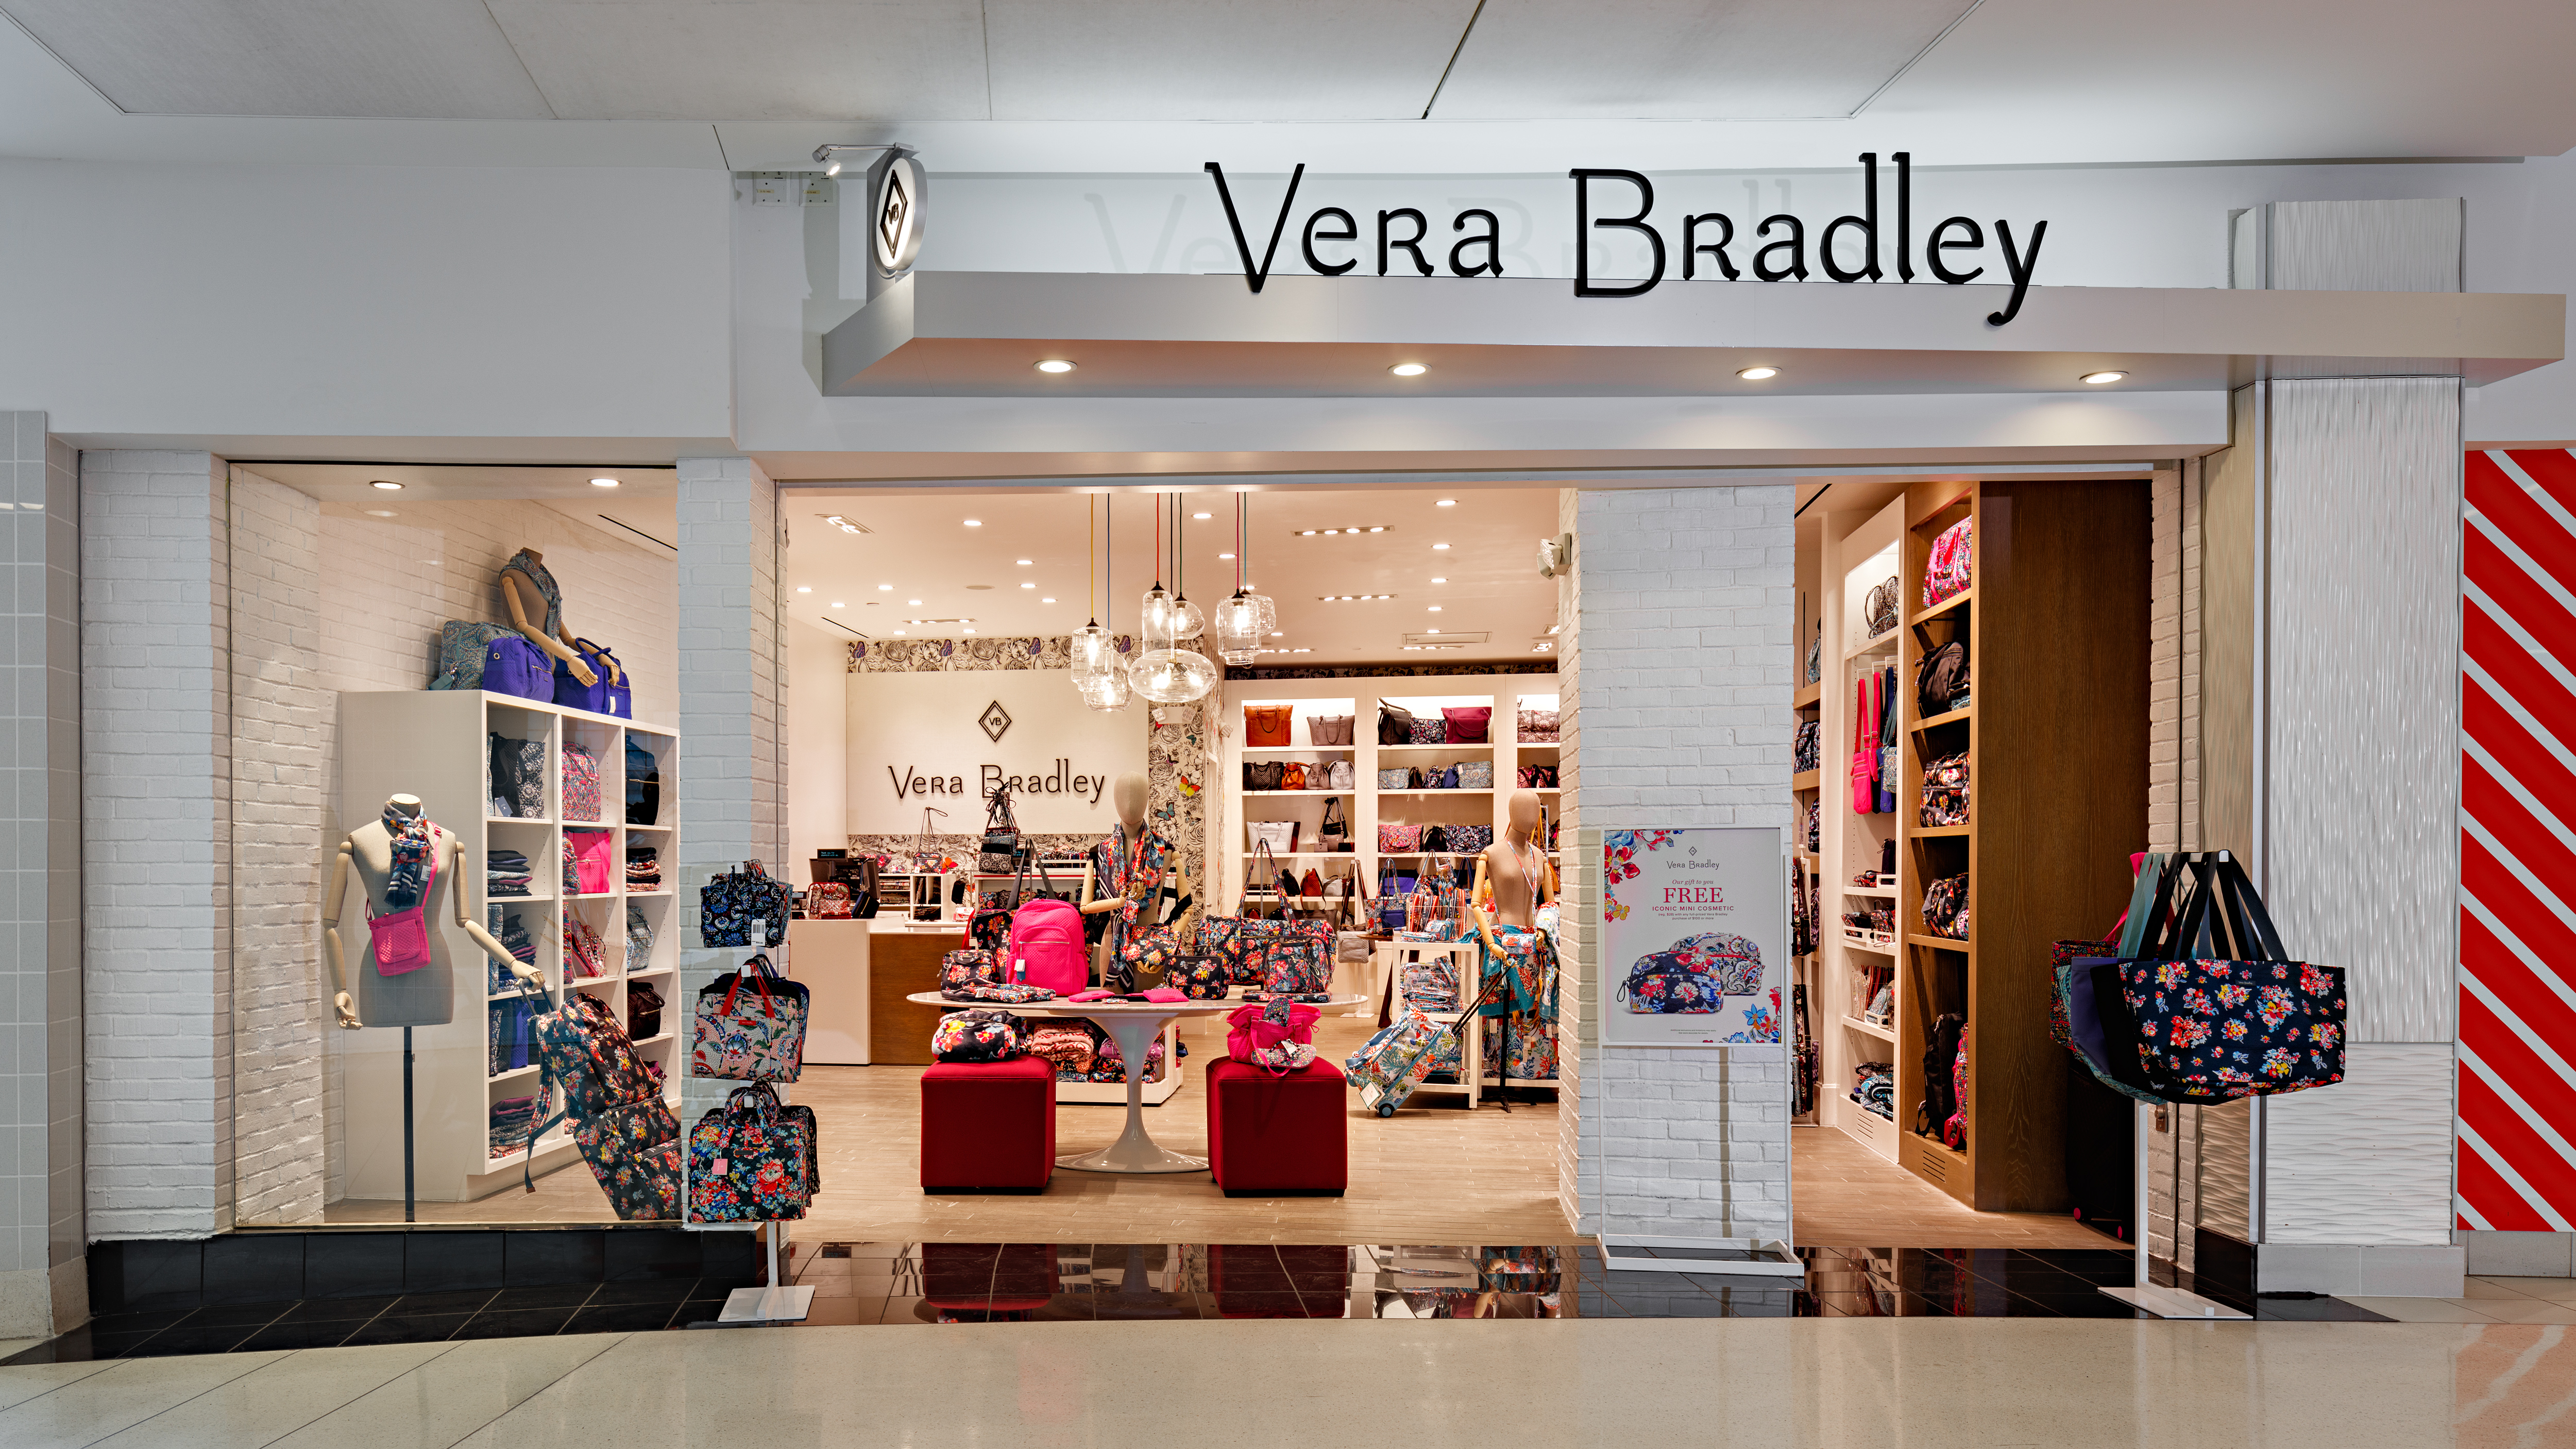 VERA BRADLEY: Take 50% off our sale items while supplies last!